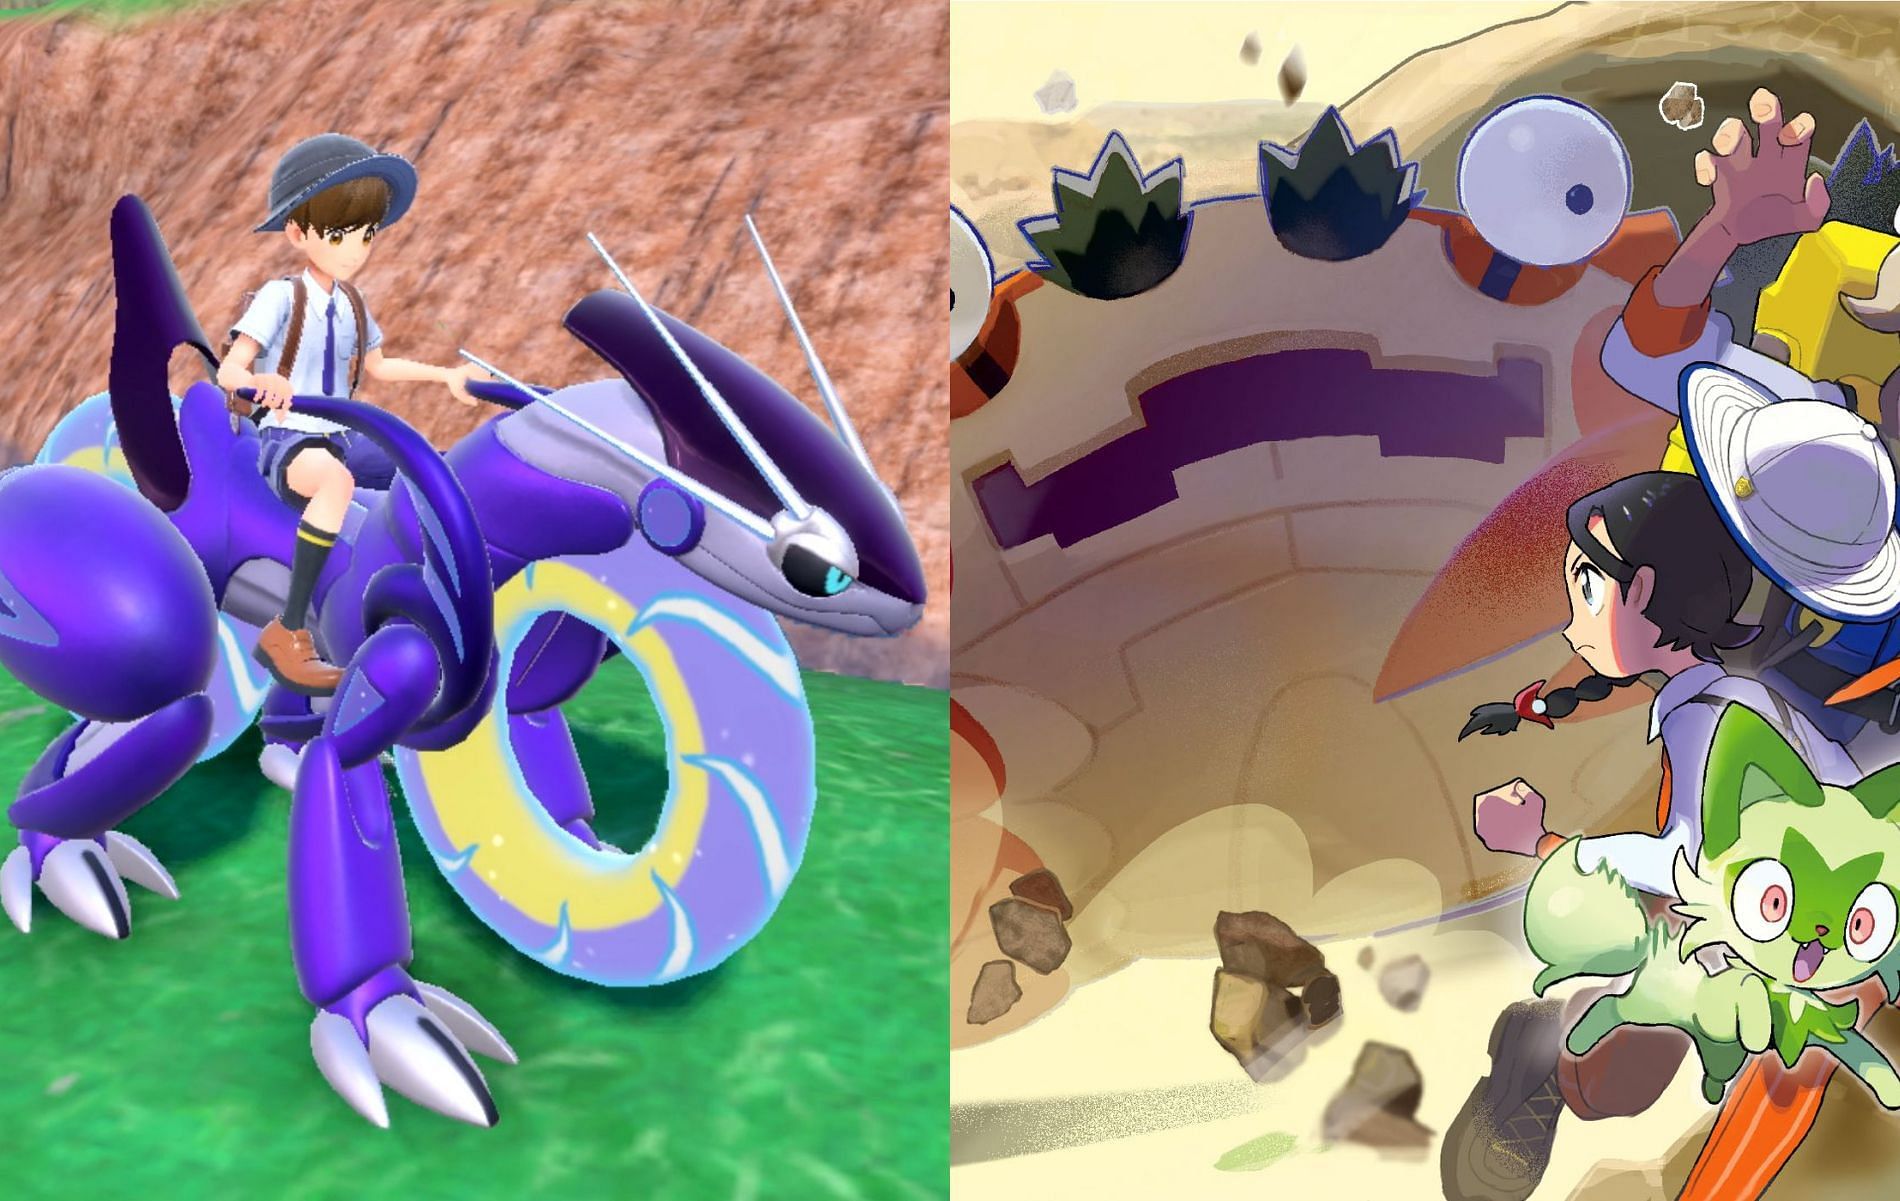 Many new surprises stlll await fans (Images via The Pokemon Company)